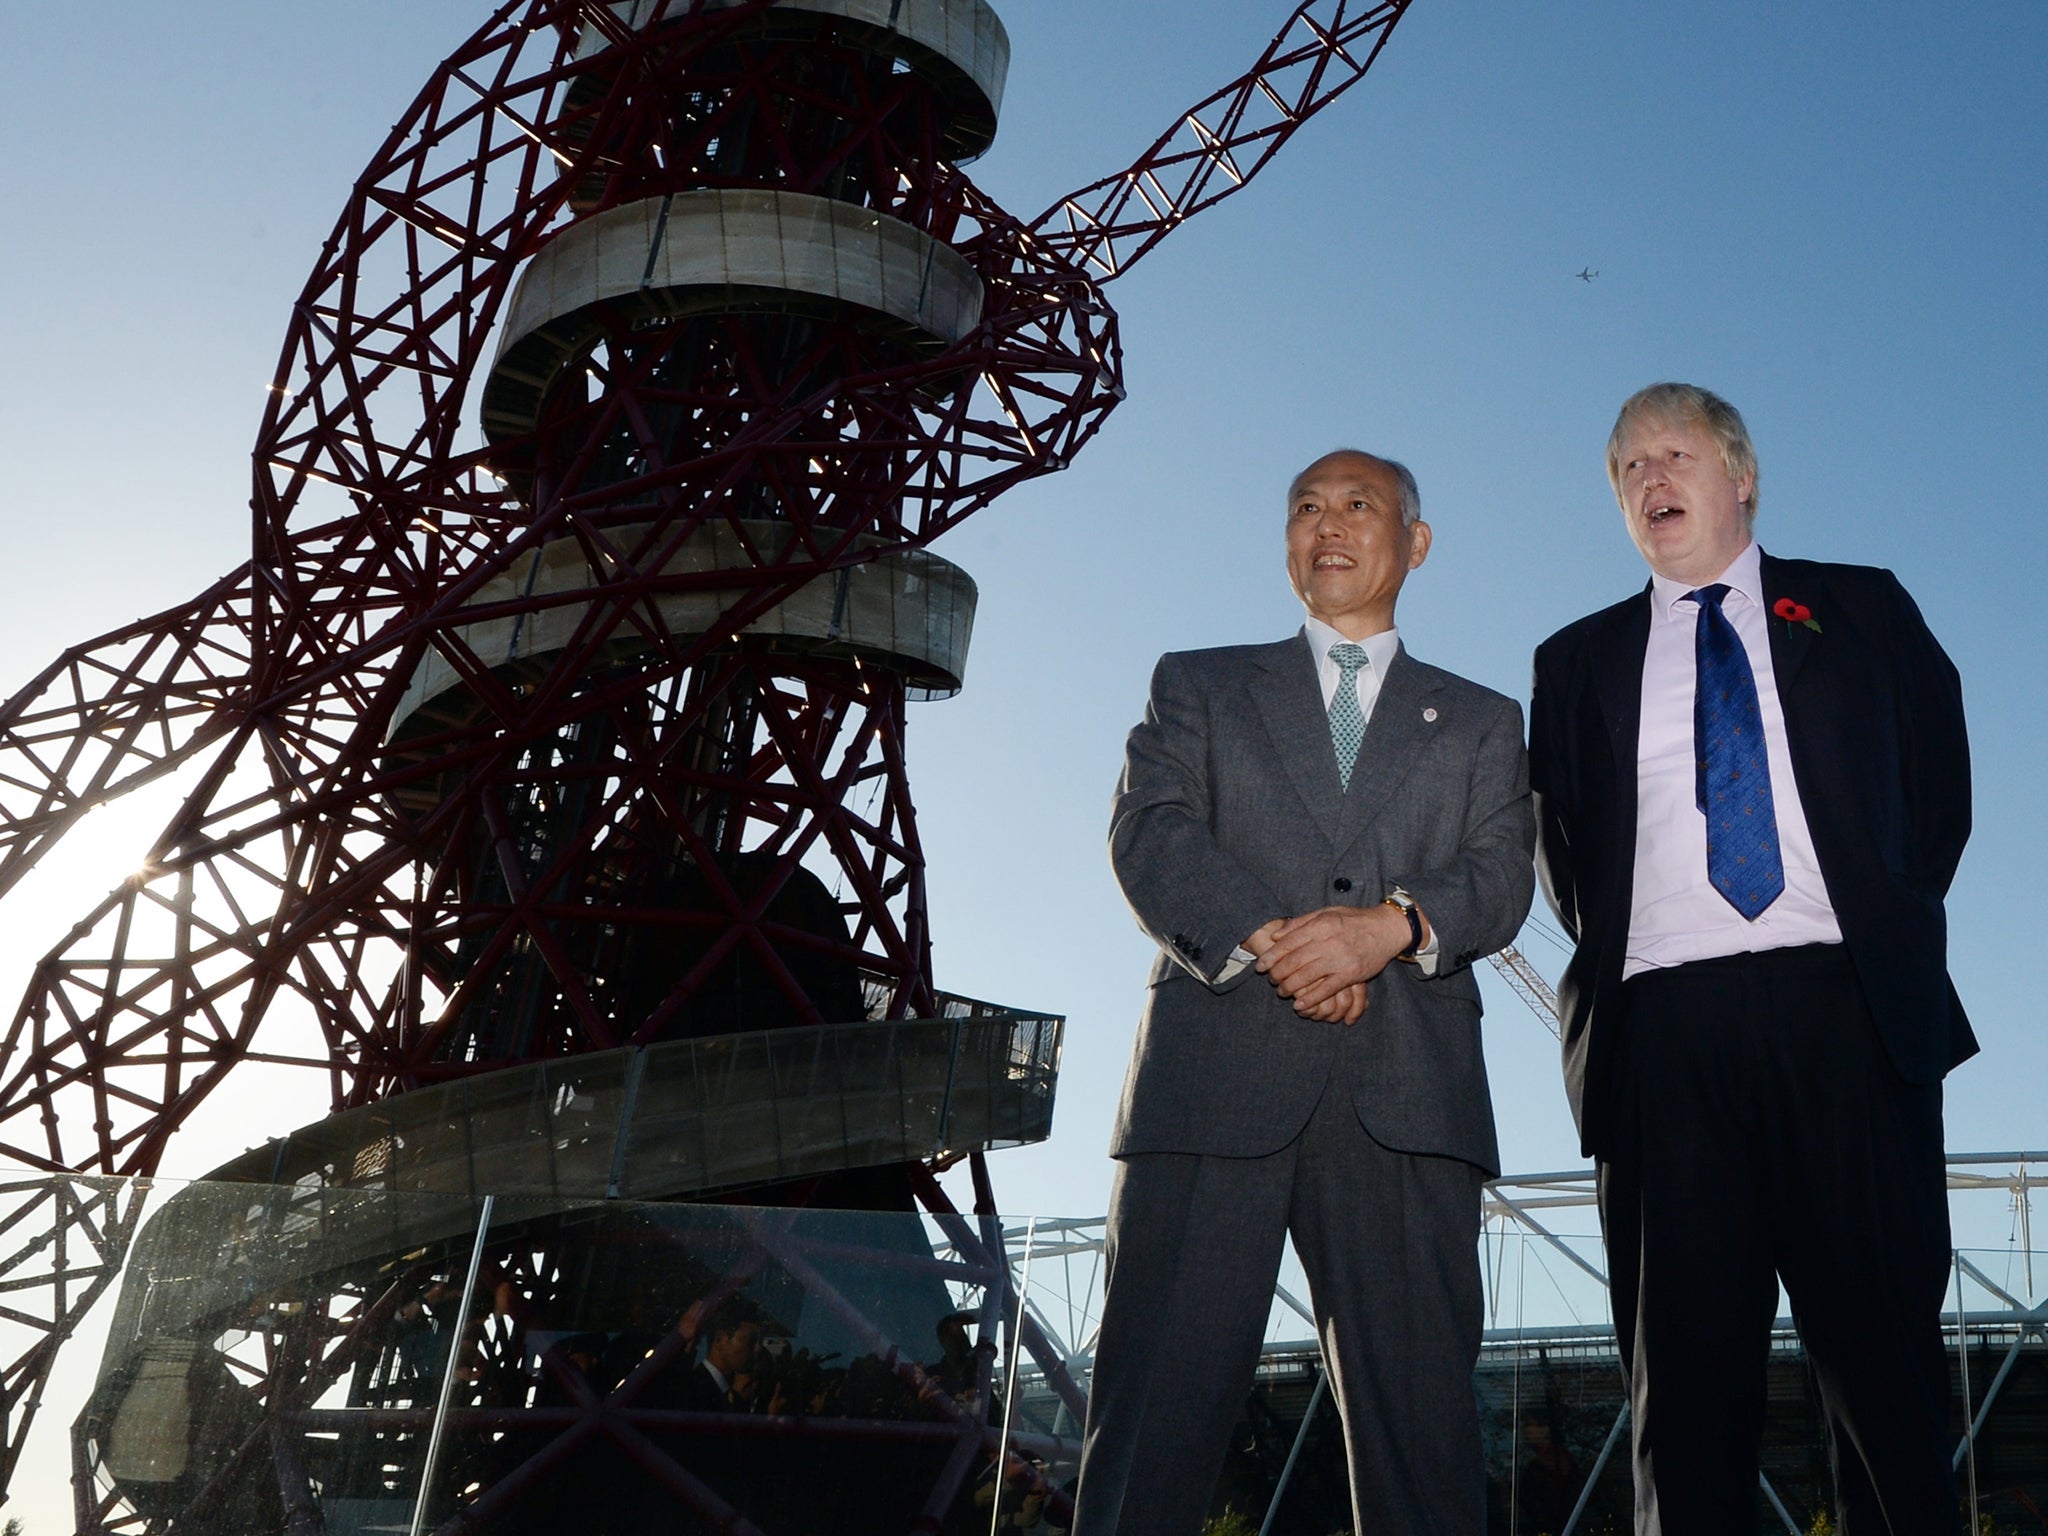 Mayor of London Boris Johnson welcomes the Governor of Tokyo Mr Yoichi Masuzoe to the Olympic Park in London, where he showed him the various London 2012 Olympic venues ahead of Tokyo hosting the 2020 Games